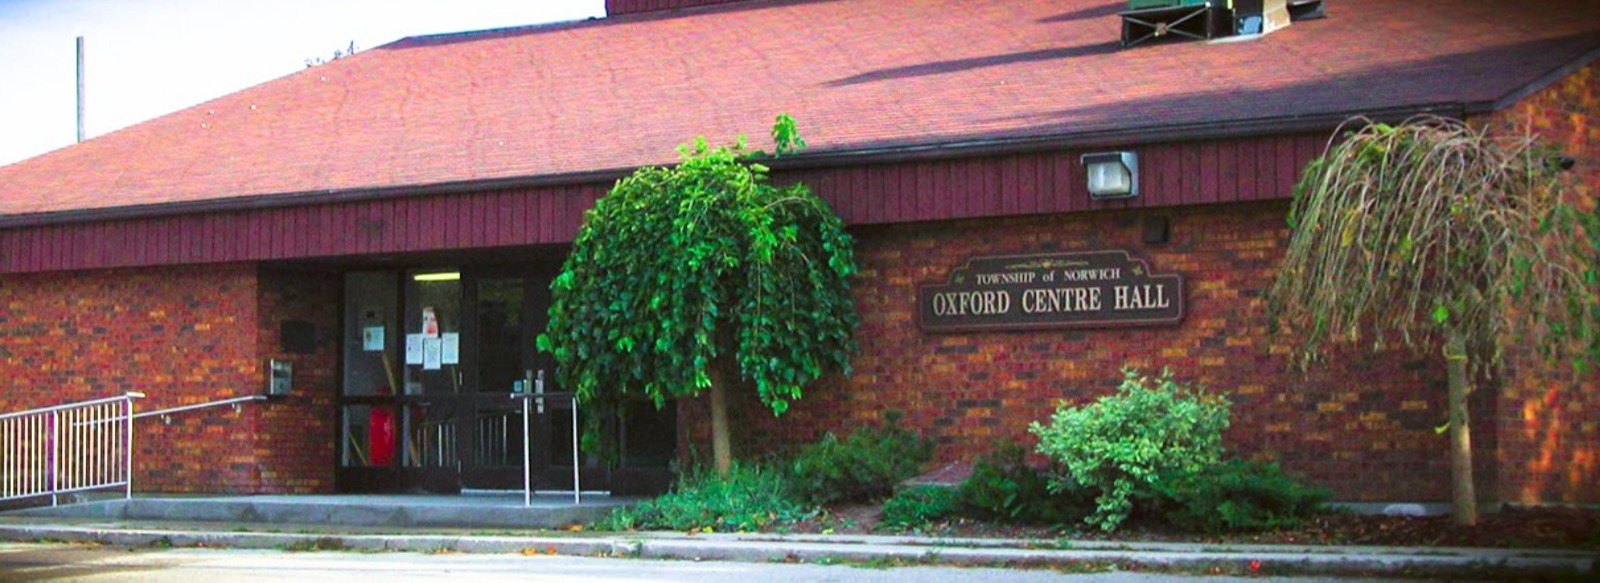 oxford centre community hall outside